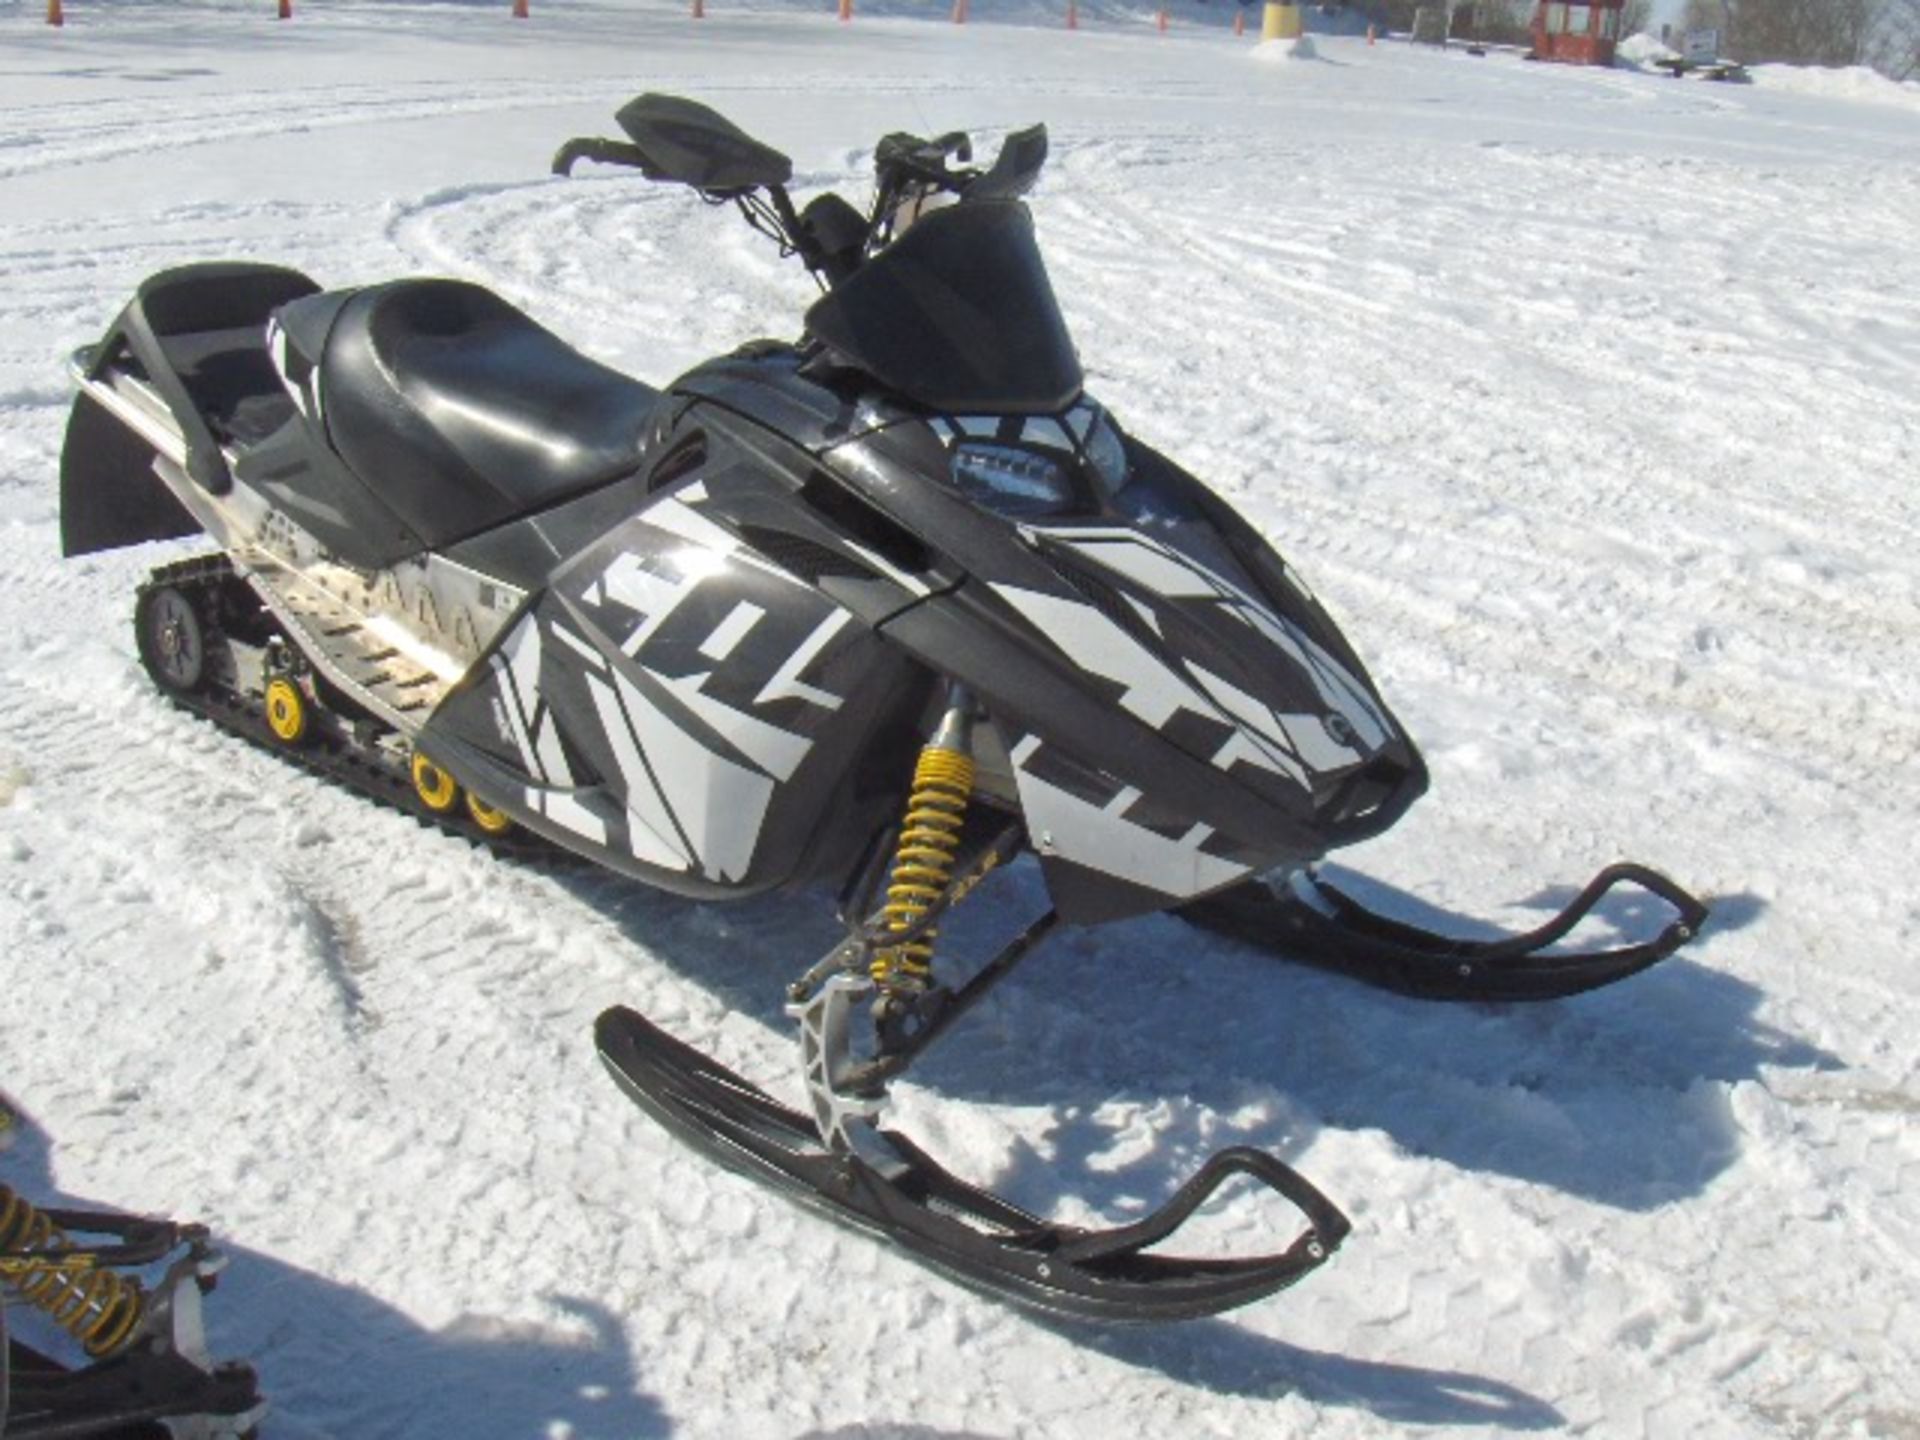 2003 SKI-DOO 800 REV 800 MXZ 2BPS226843V001102 Snowmobile, sold with a bill of sale only - Image 2 of 3